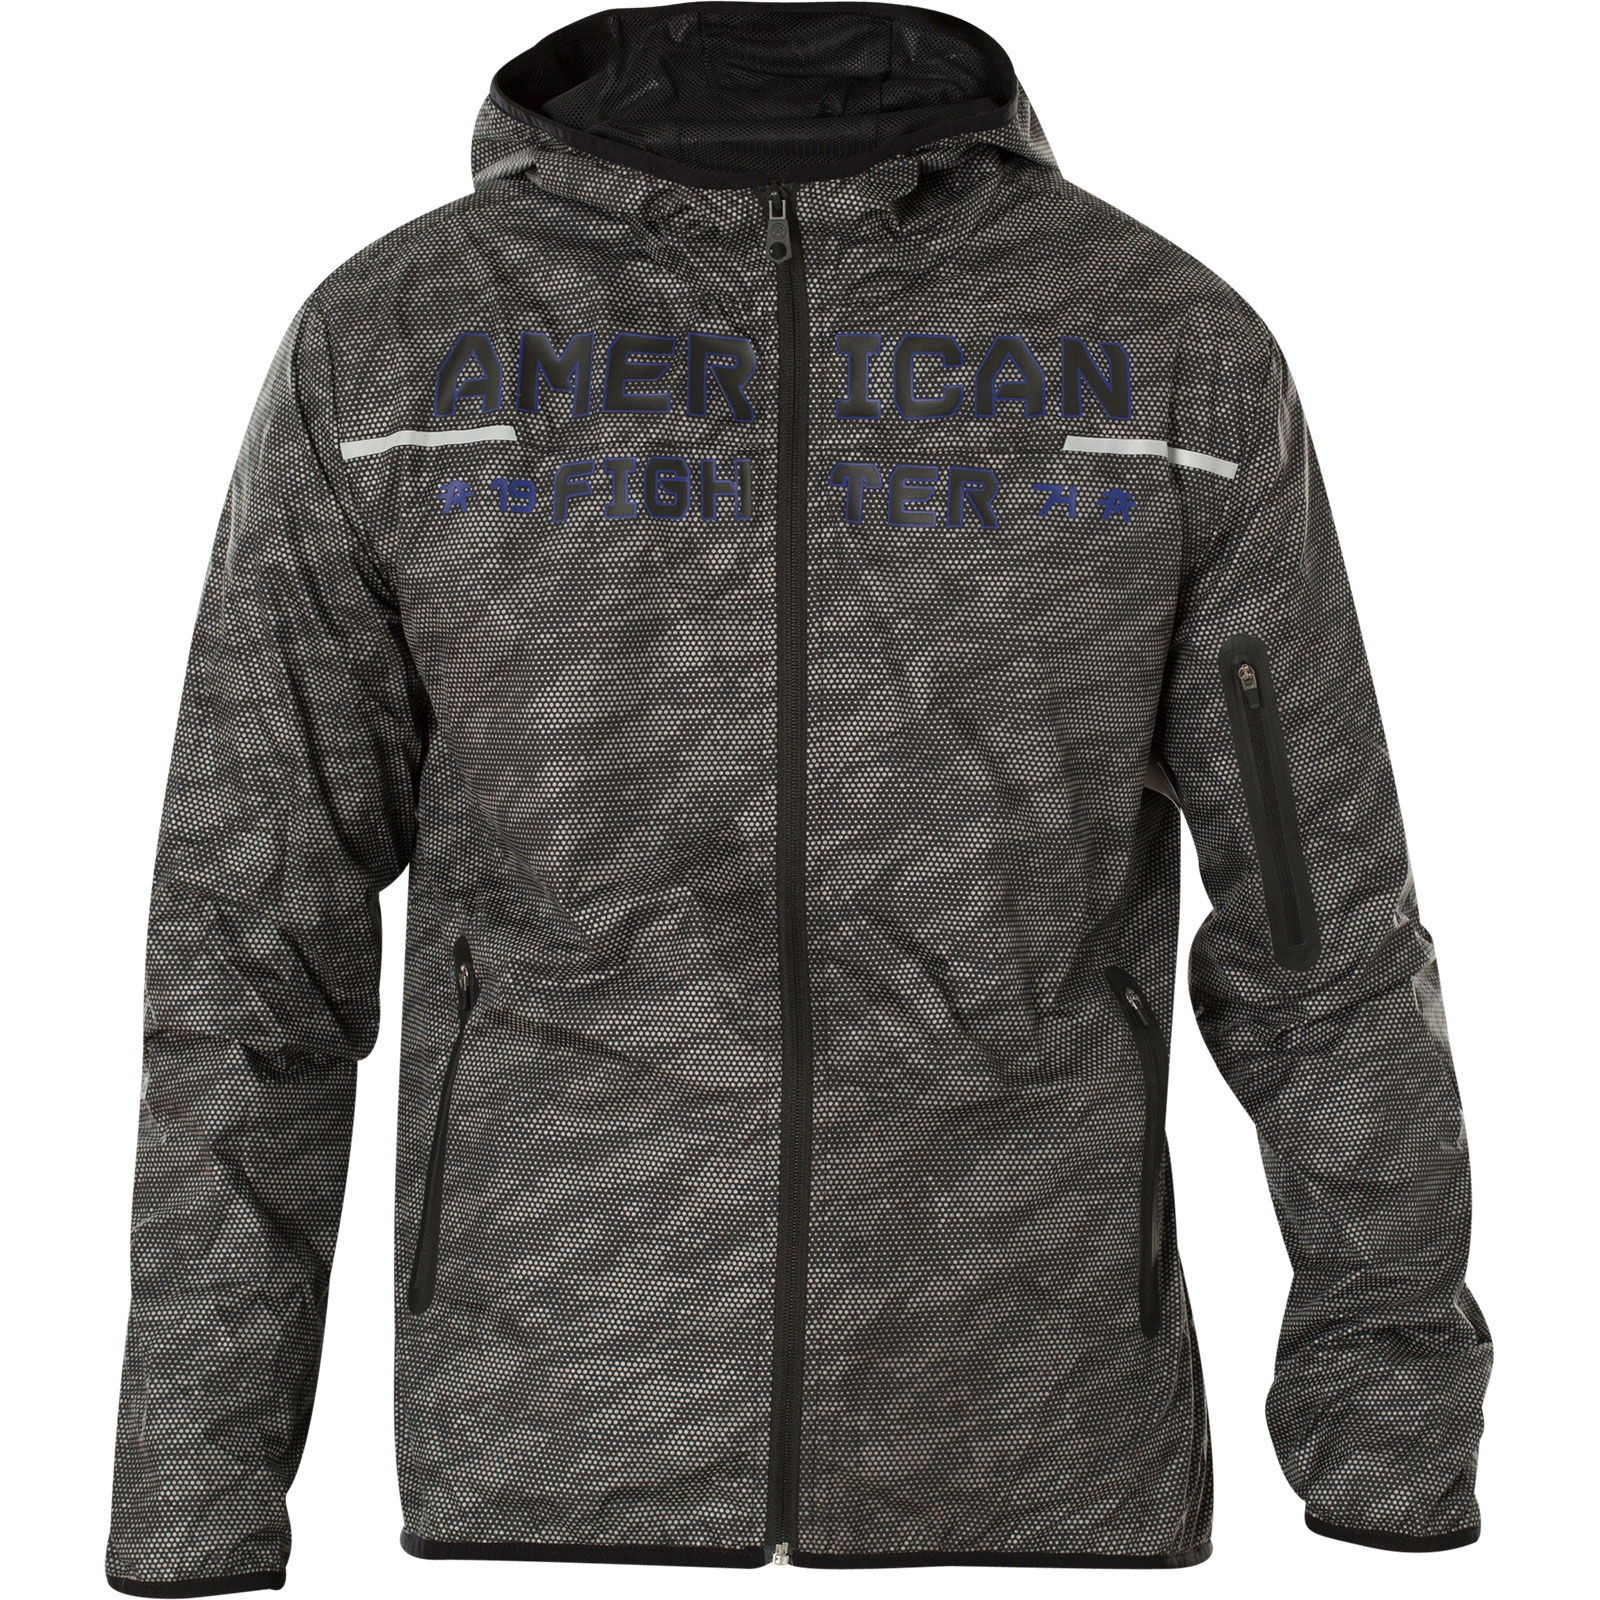 American Fighter by Affliction Wind jacket with reflecting stripes